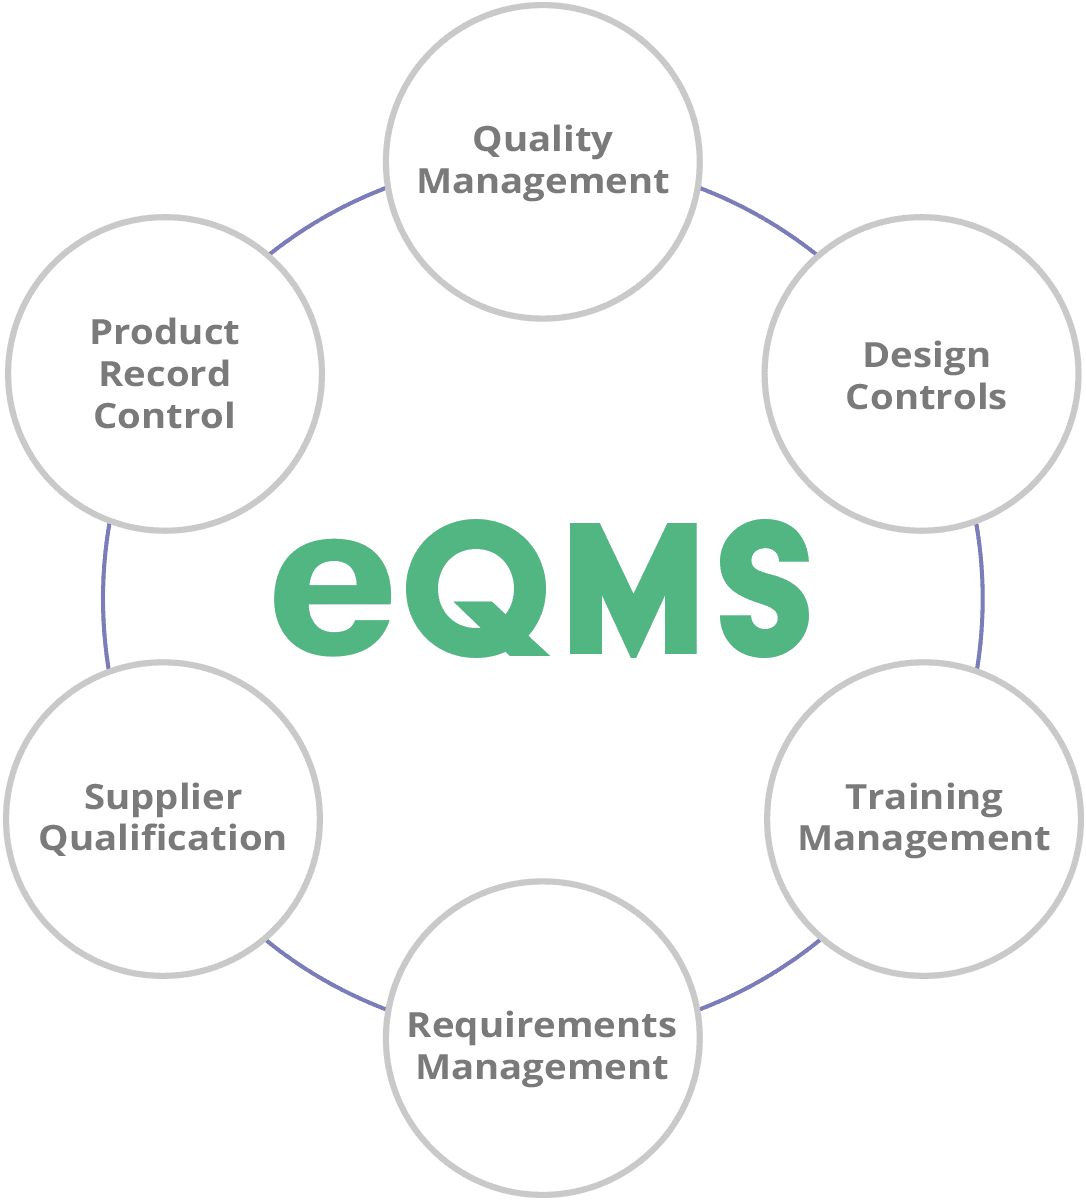 What is a Electronic Quality Management System